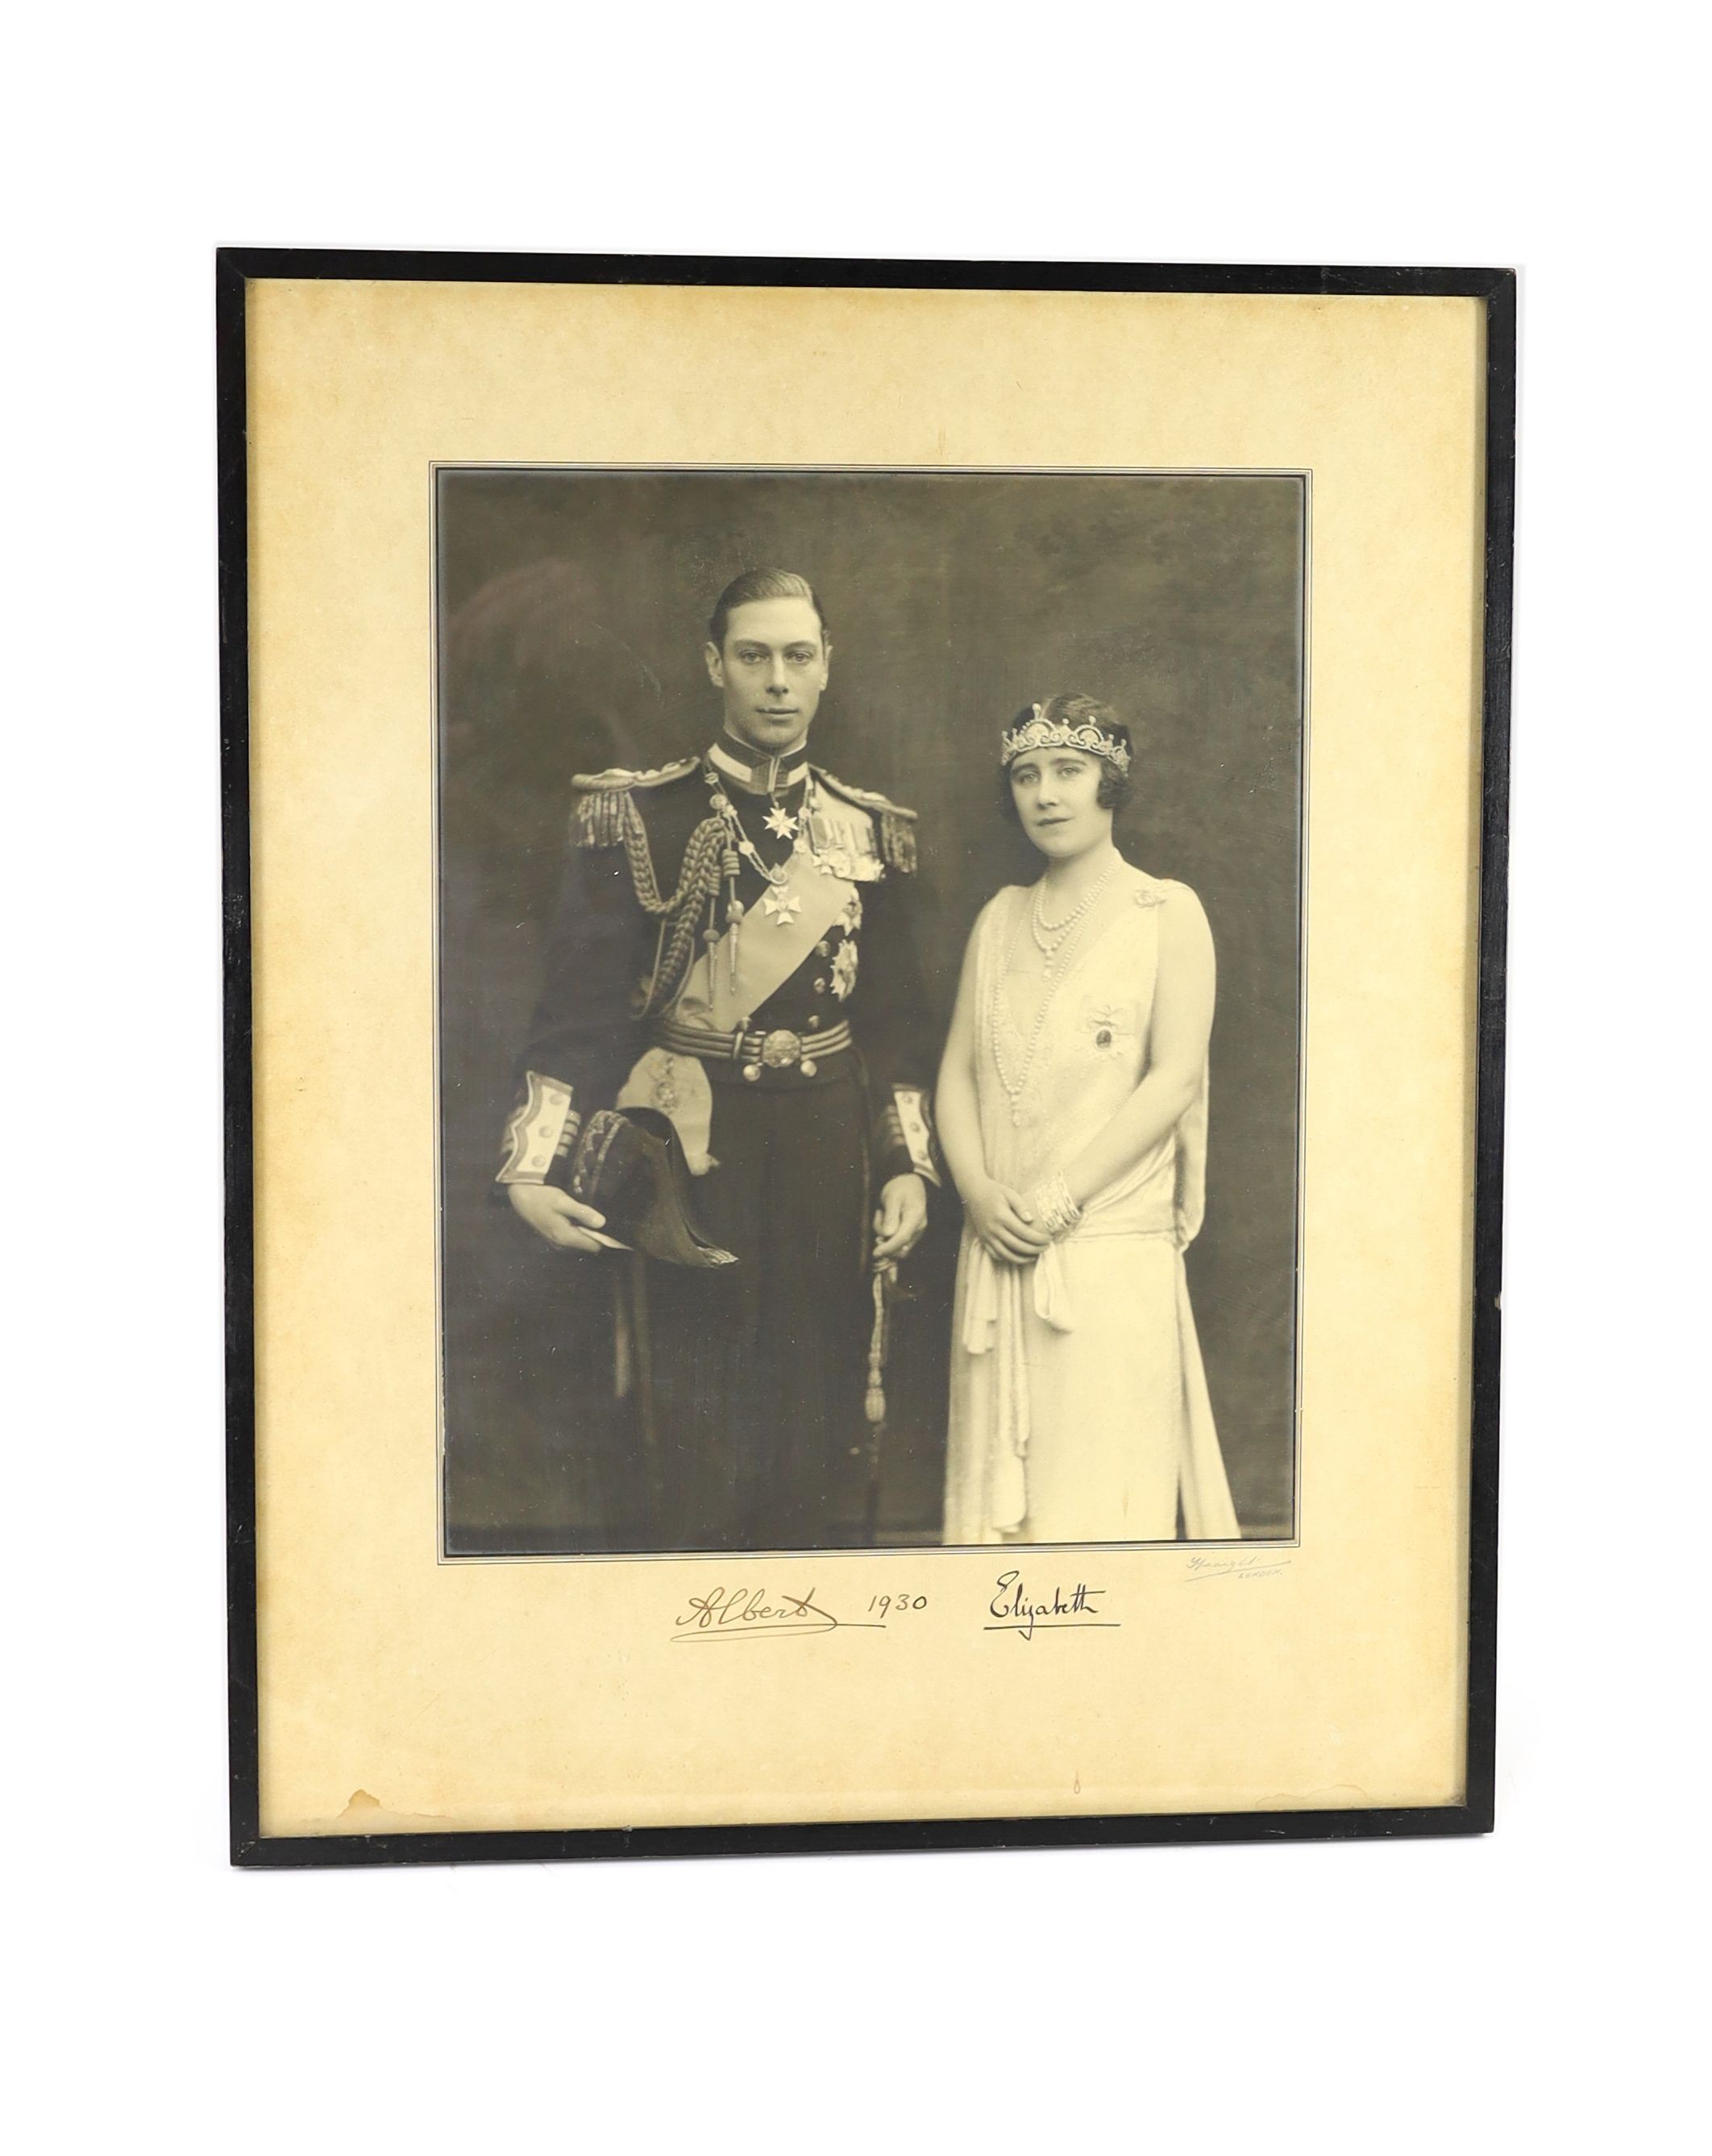 A large signed photograph of the Duke and Duchess of York, Albert and Elizabeth, by Speaight of London and dated 1930